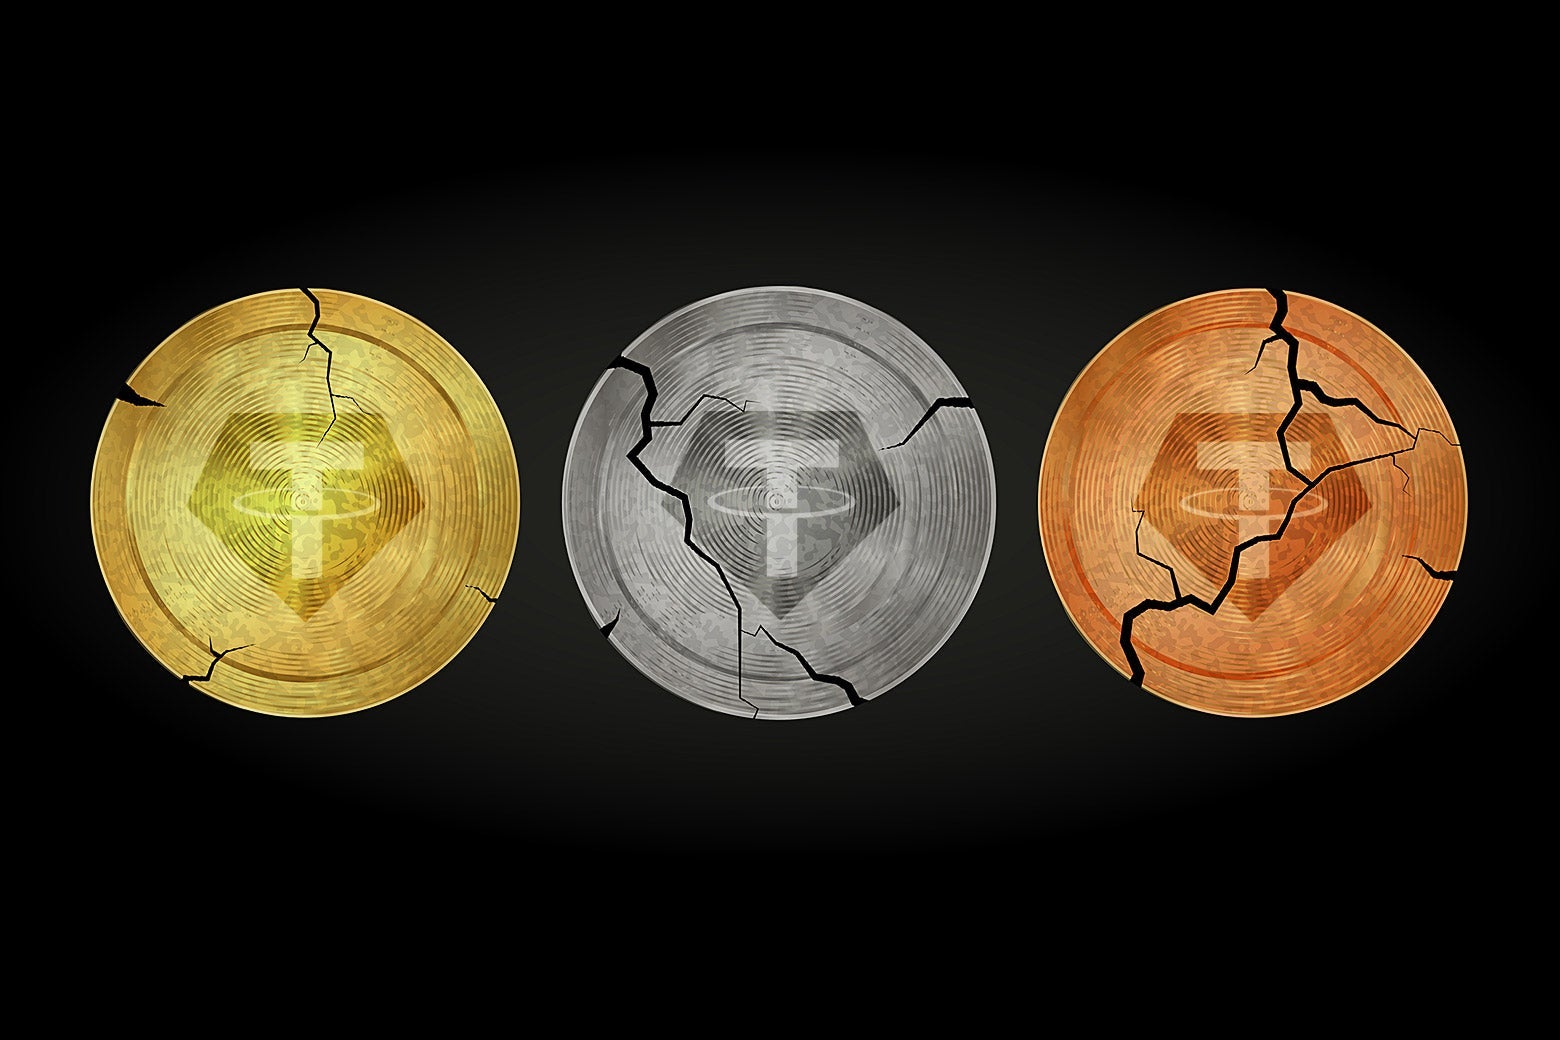 A gold Tether coin, a silver Tether coin, and a bronze Tether coin, all with varying amounts of cracks.